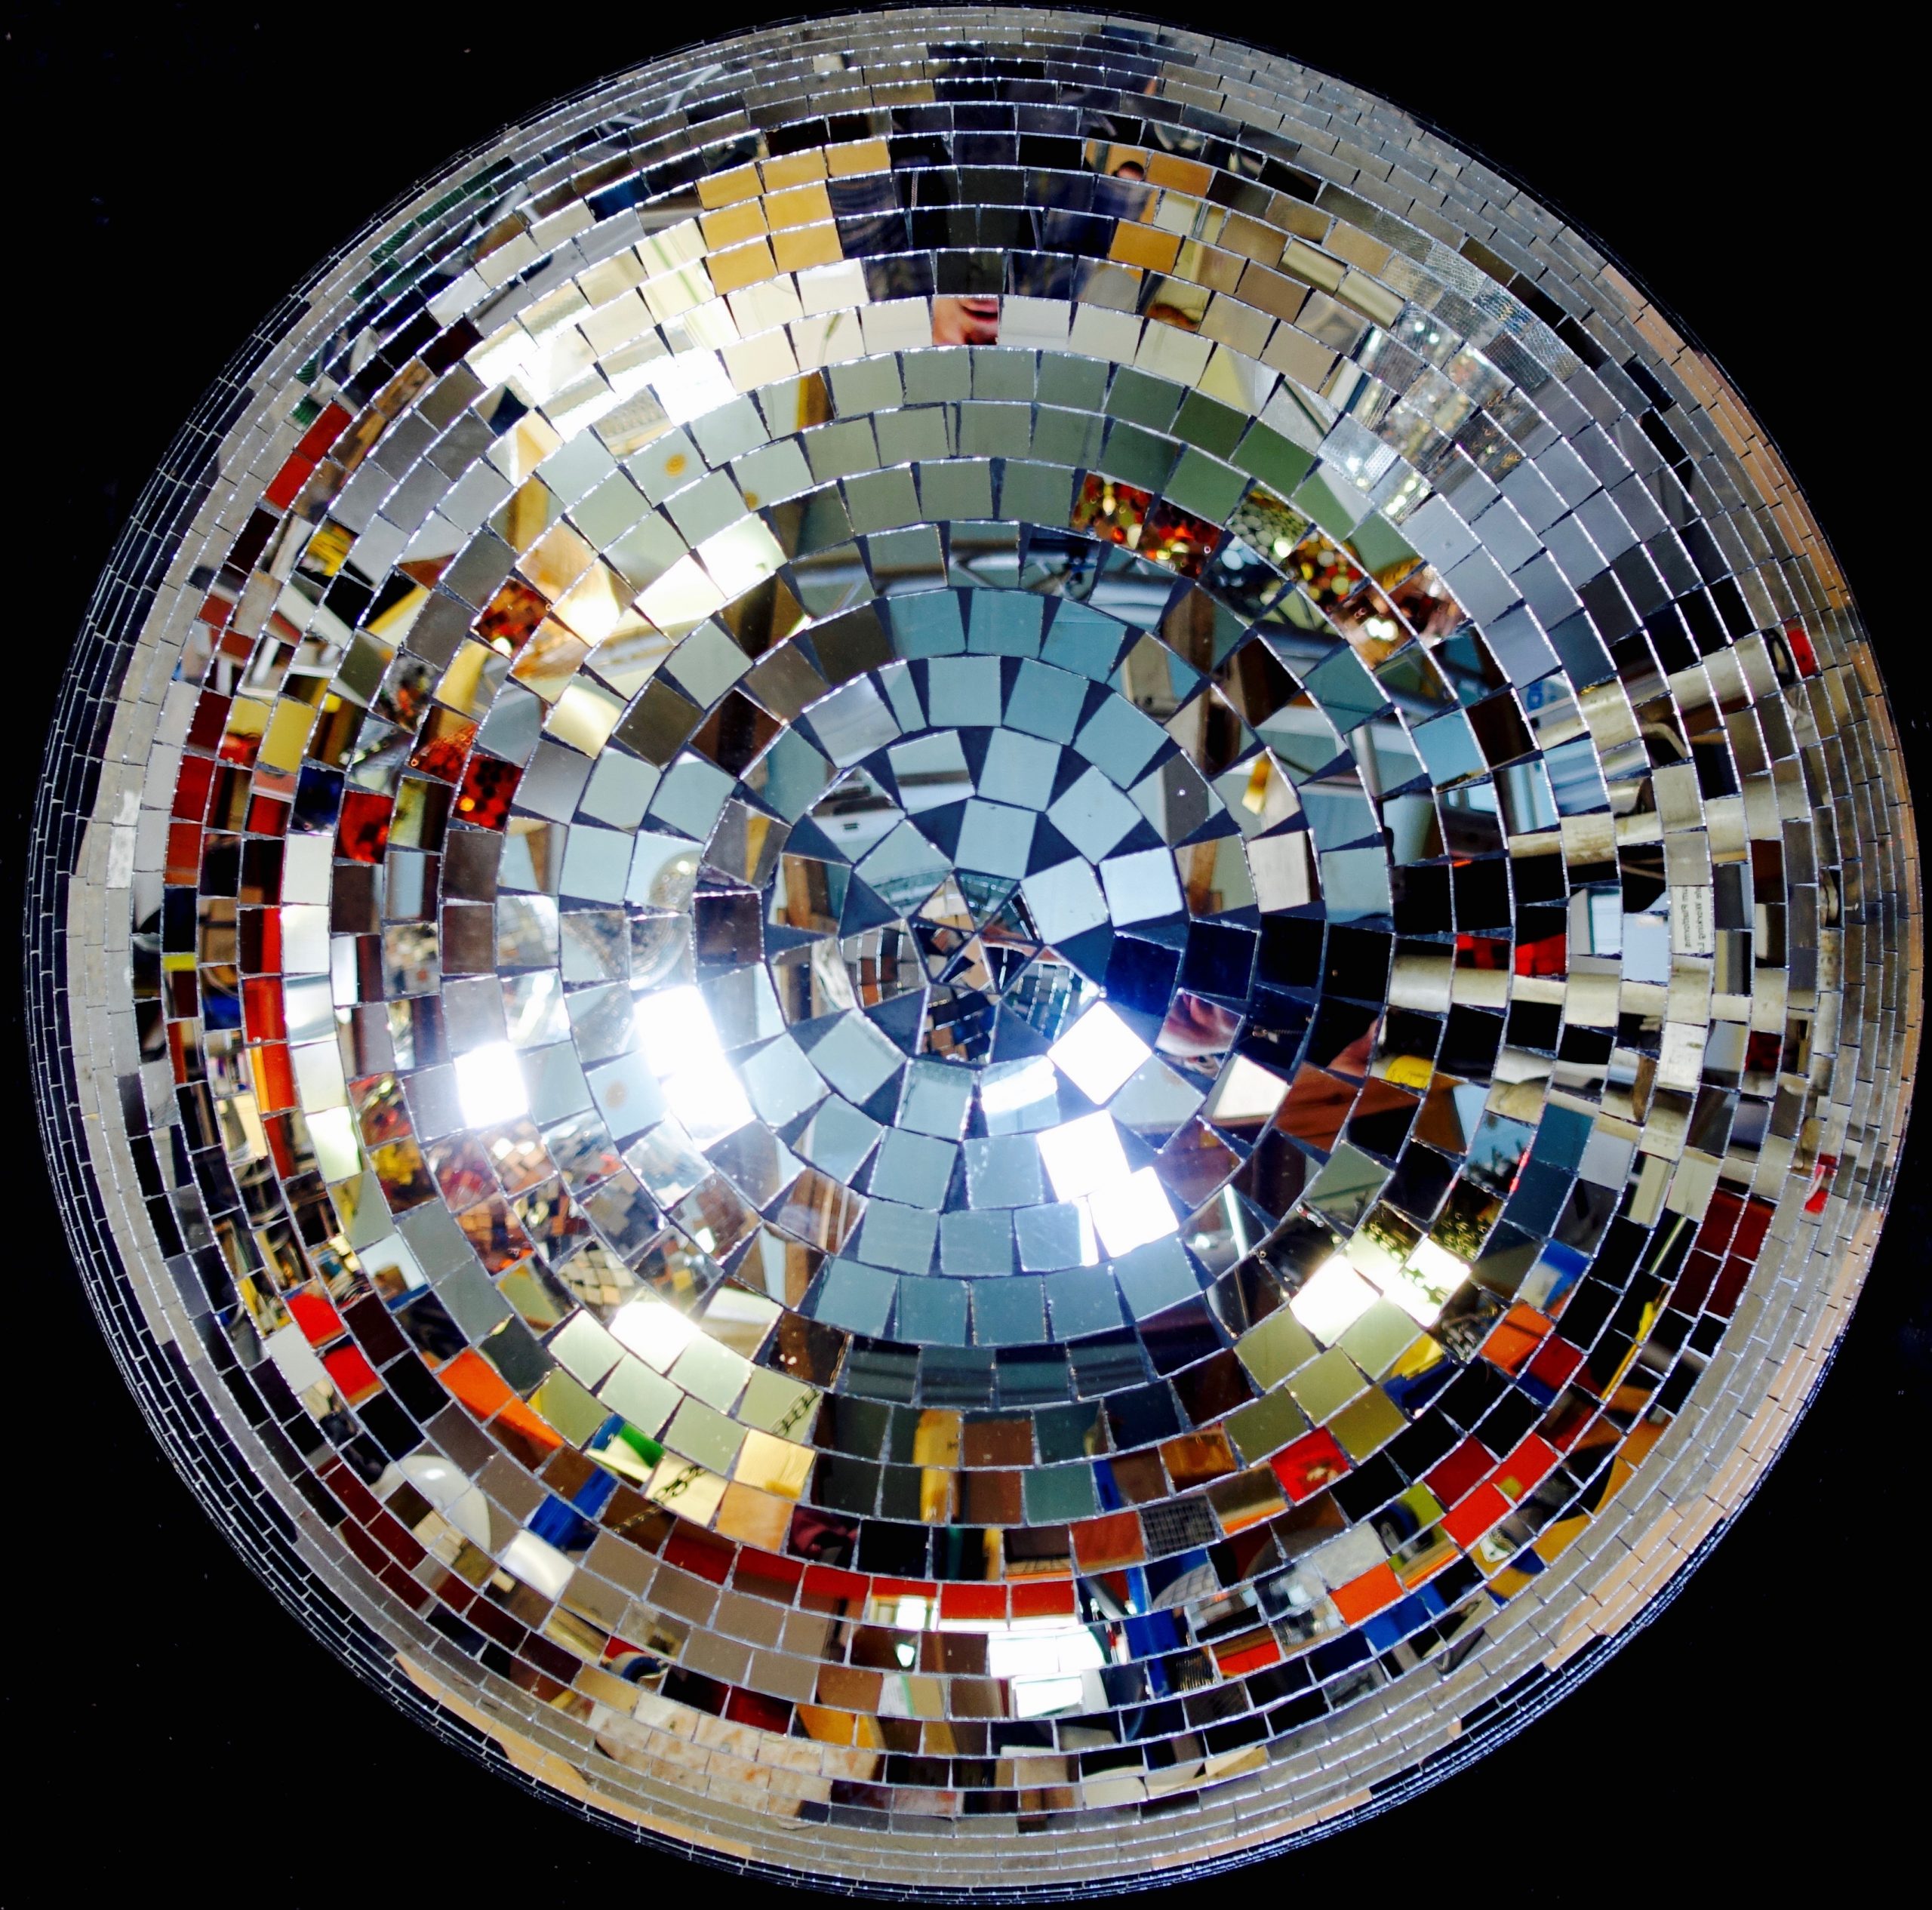 1m silver mirror ball approx weight - 30kg dry hire fee - £195 purchase price - POA